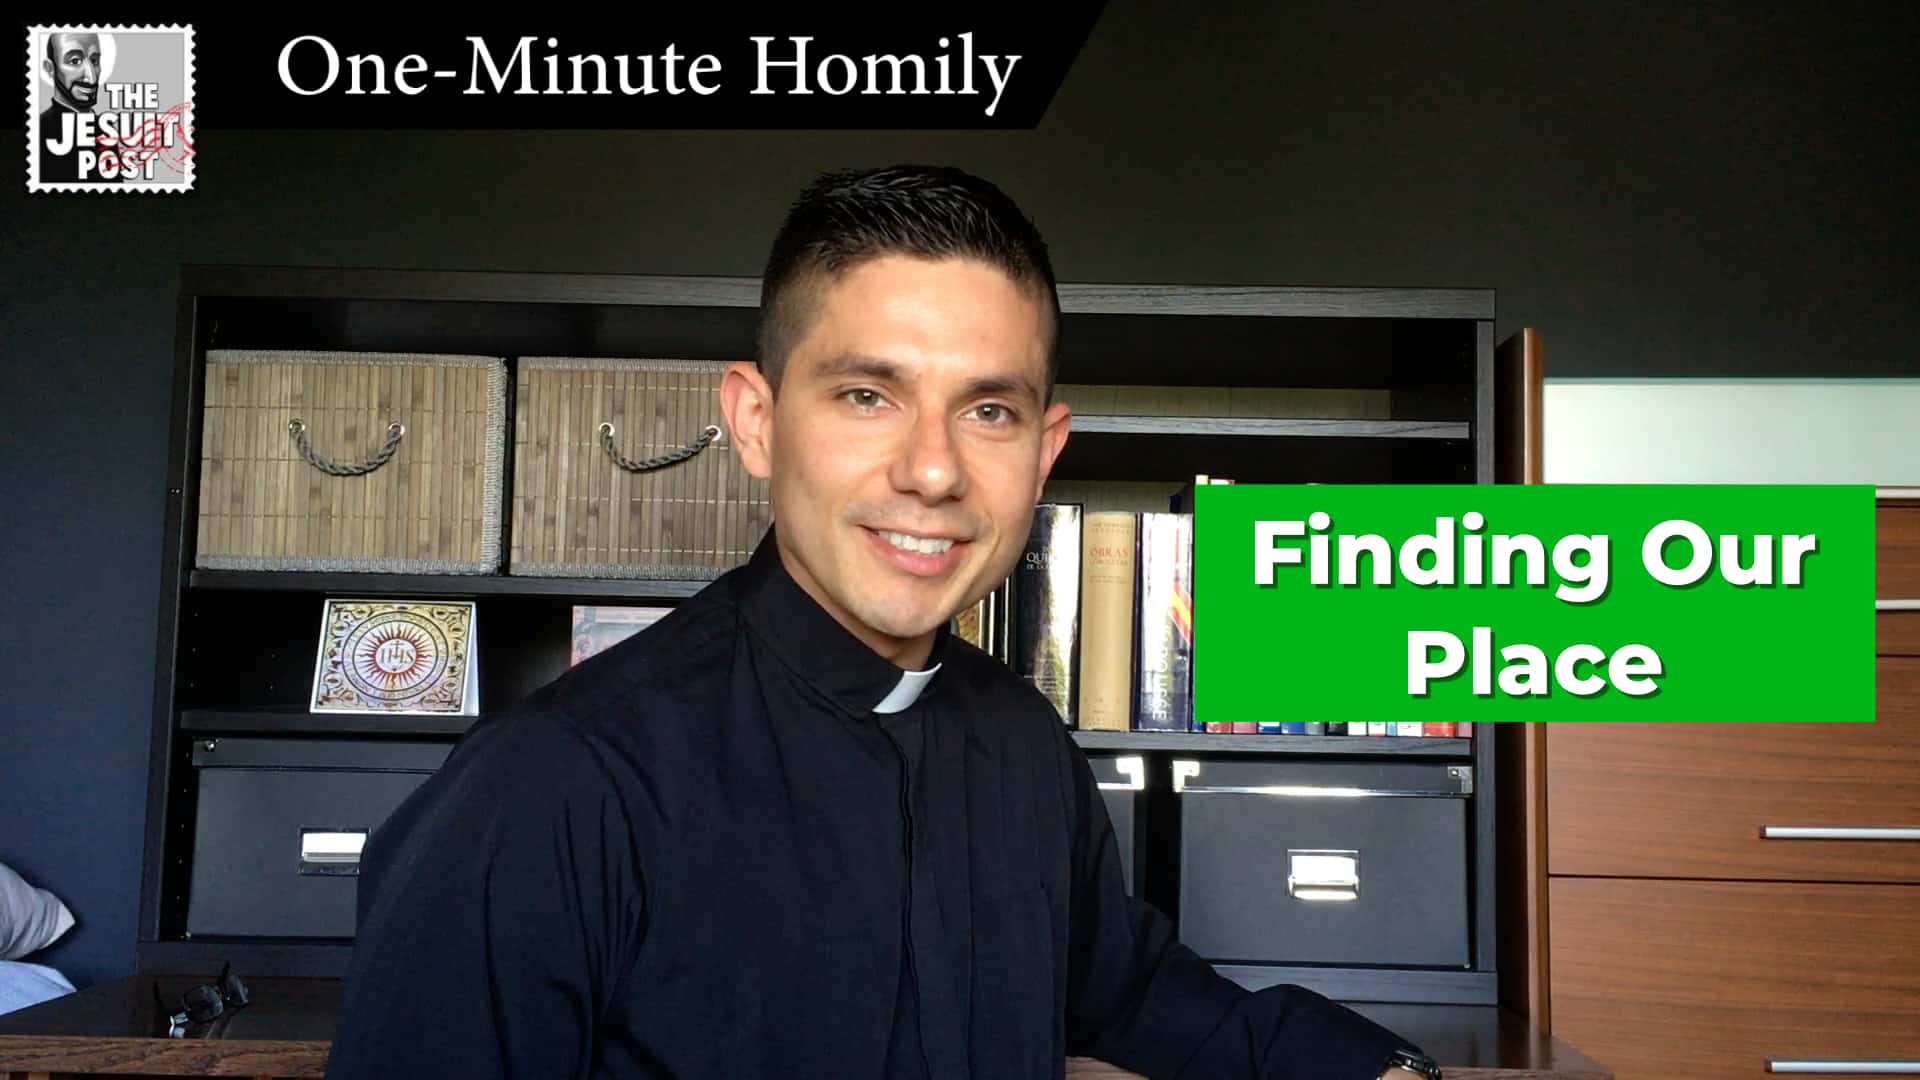 One-Minute Homily: “Finding Our Place”